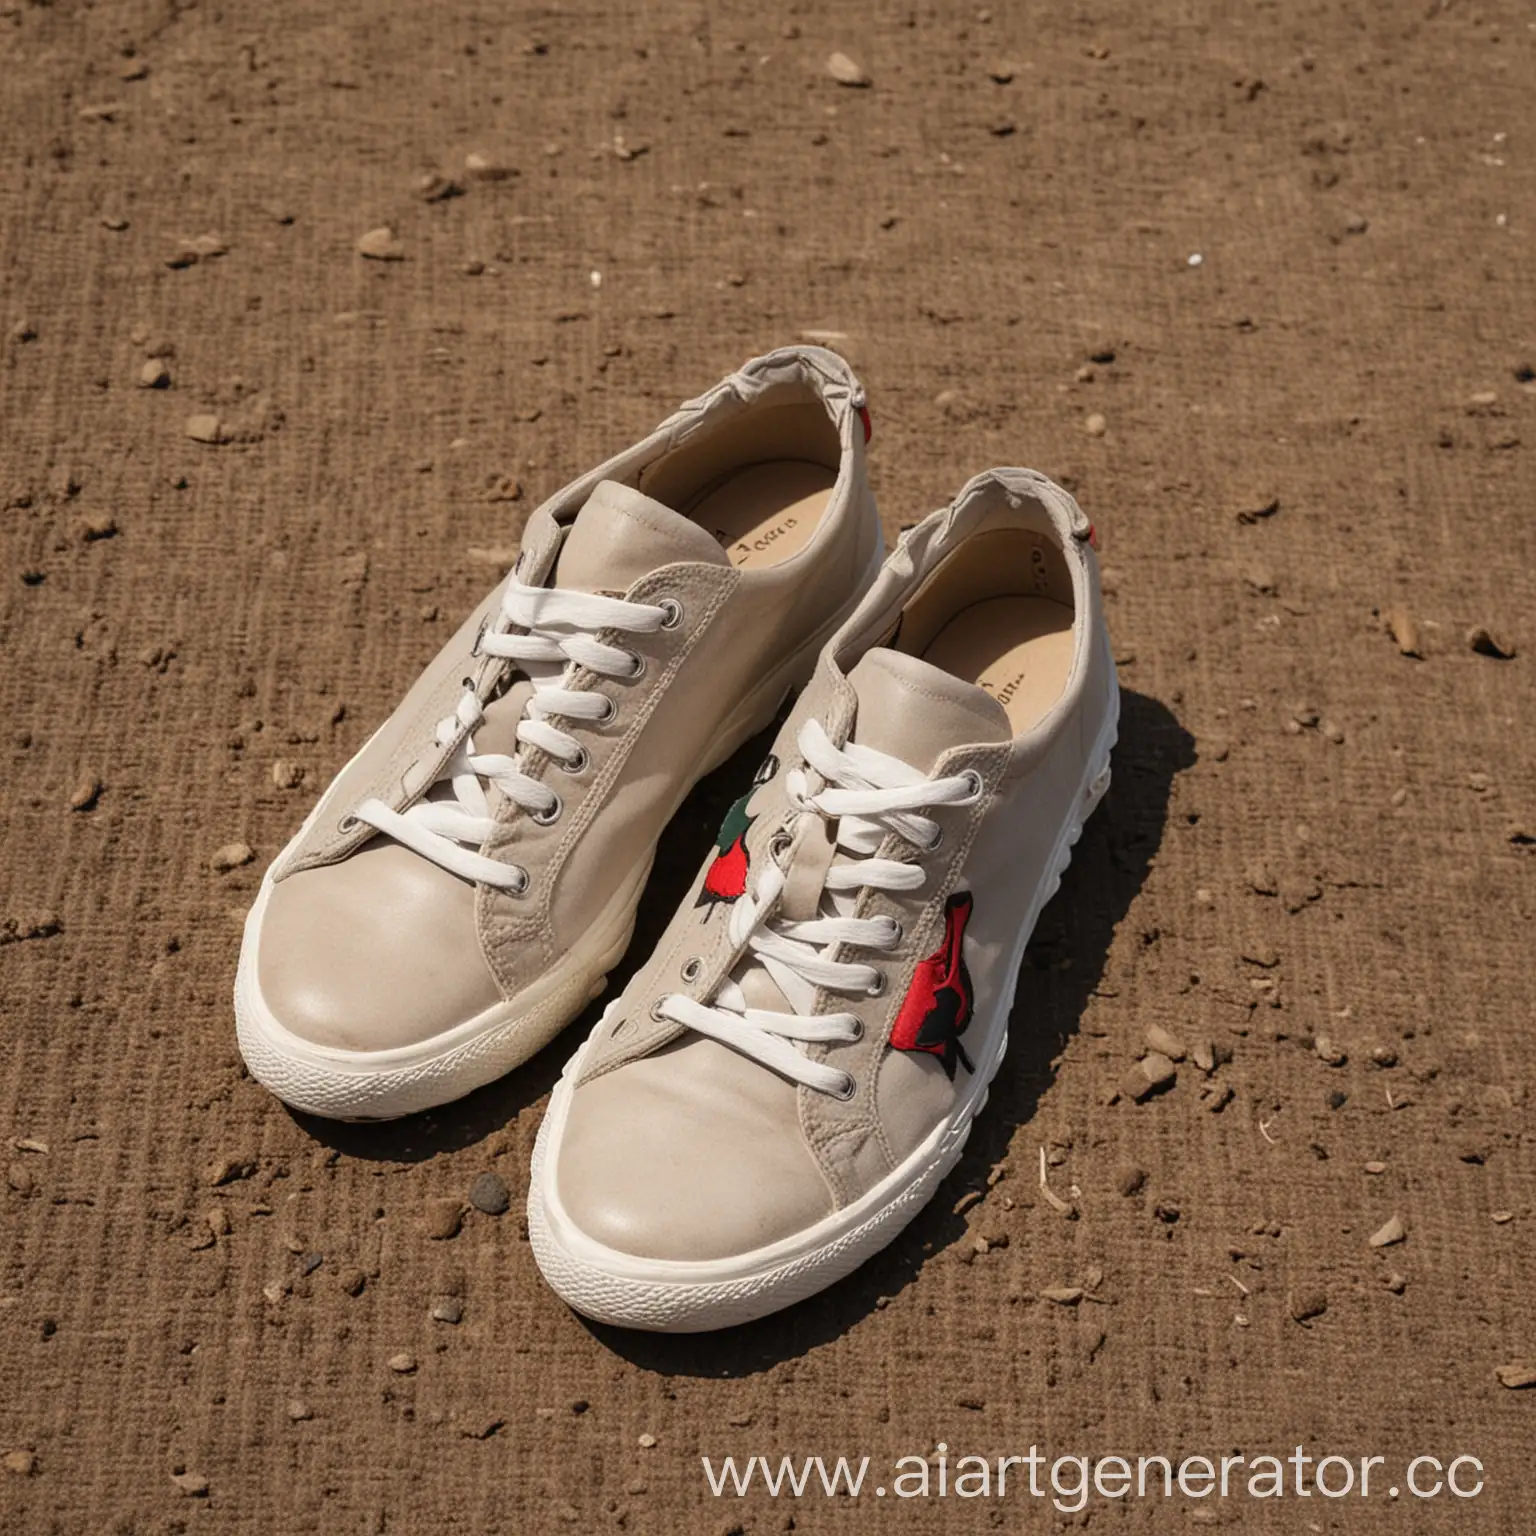 Vintage-Sneakers-on-Rural-Collective-Farm-Background